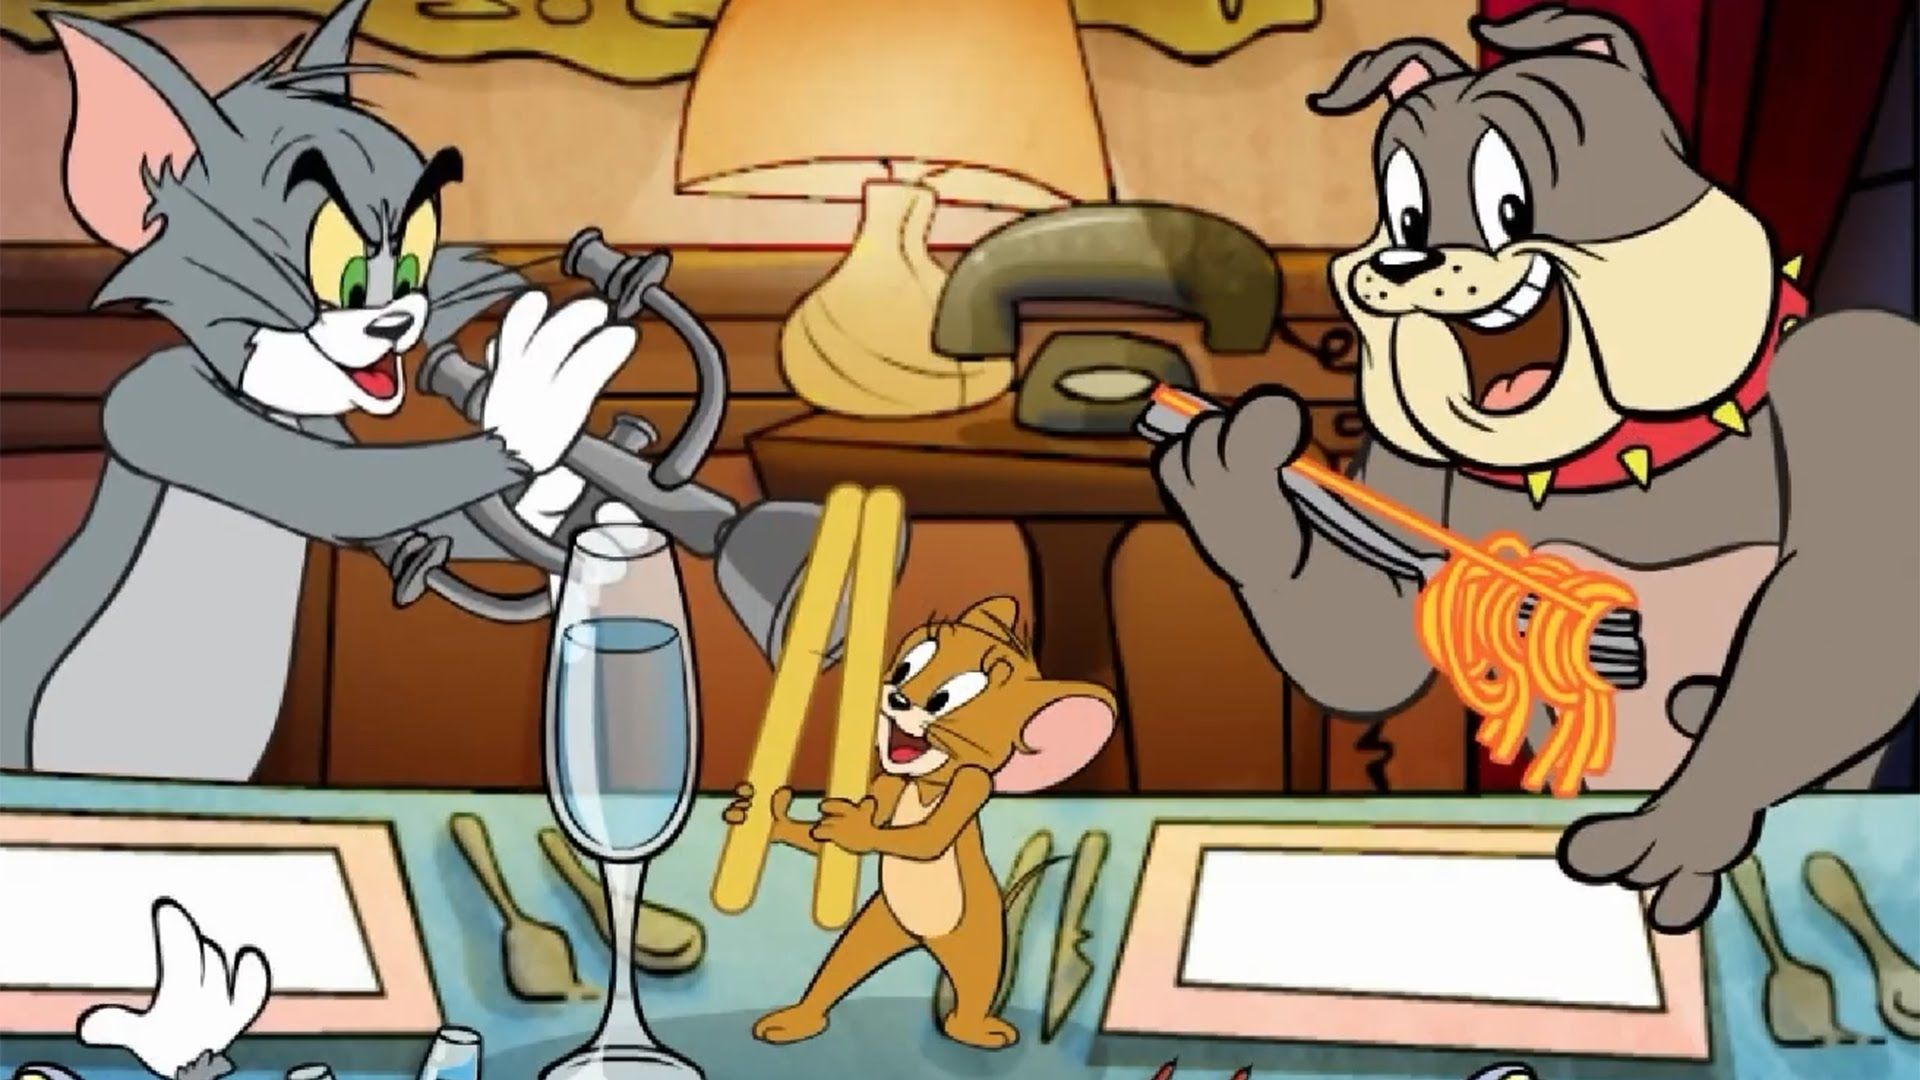 Tom and Jerry Wallpaper. Tom and Jerry Cartoon Wallpaper, Tom and Jerry Wallpaper and Tom and Jerry Background